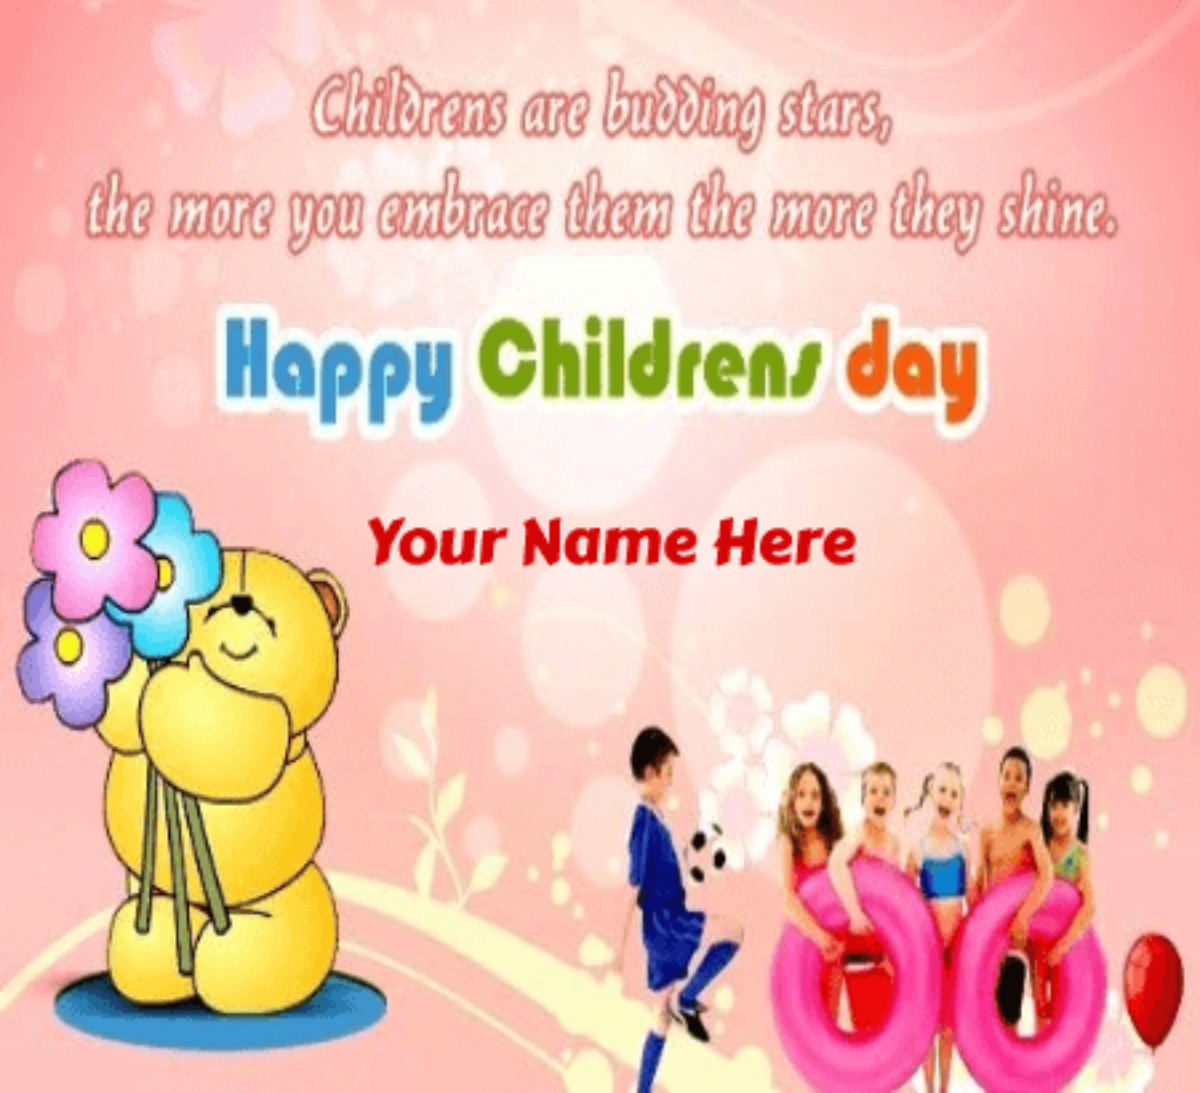 Children's Day Wishes With Name - Write Your Name on Wishes